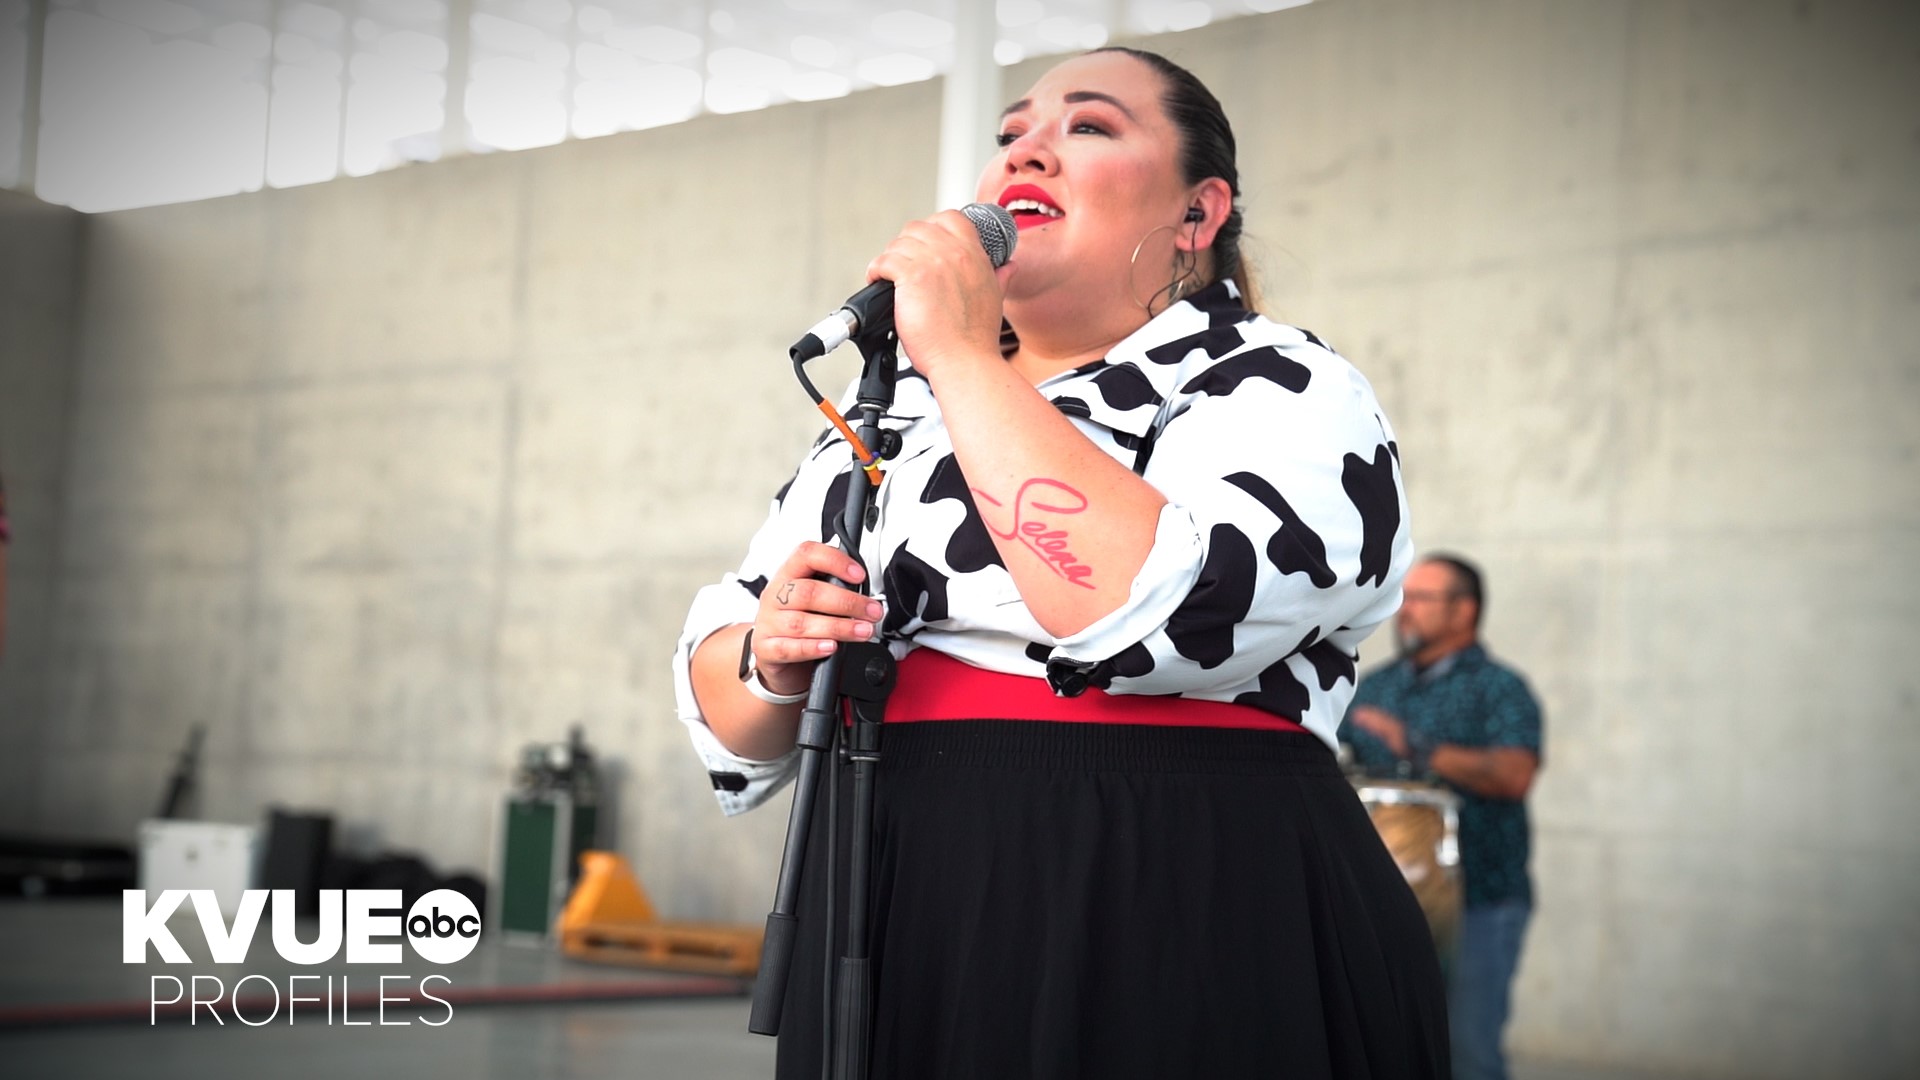 Bidi Bidi Banda is more than your typical Selena tribute band. They are up-and-coming Tejano musicians paving a way for all artists of color – one show at a time.